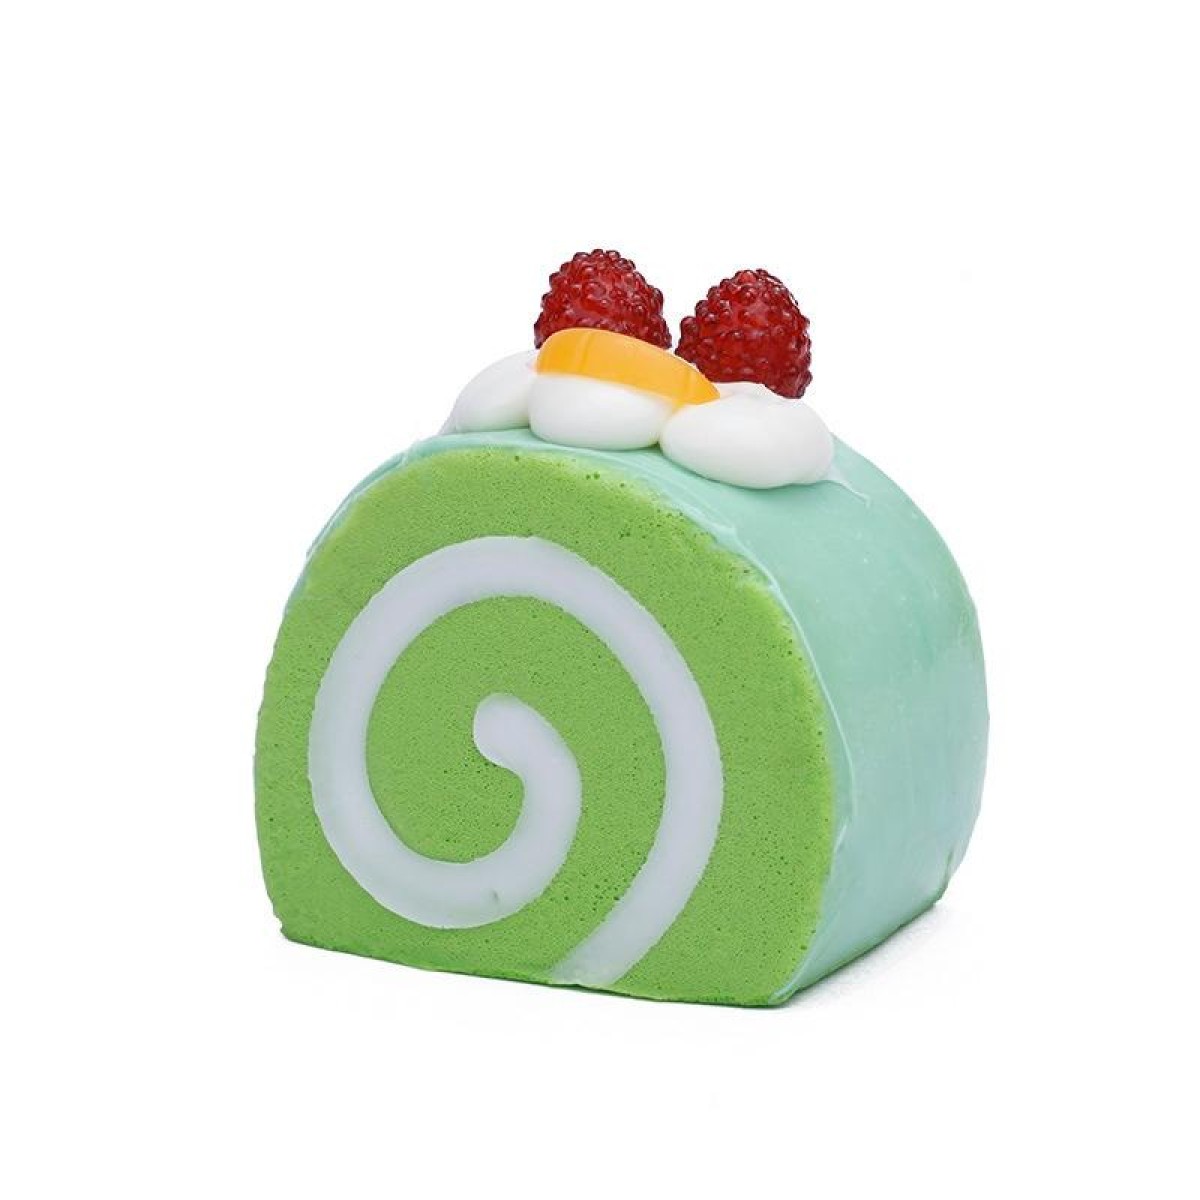 Simulation Egg Roll Cake Refrigerator Sticker Photography Props Decoration(Glossy Green)